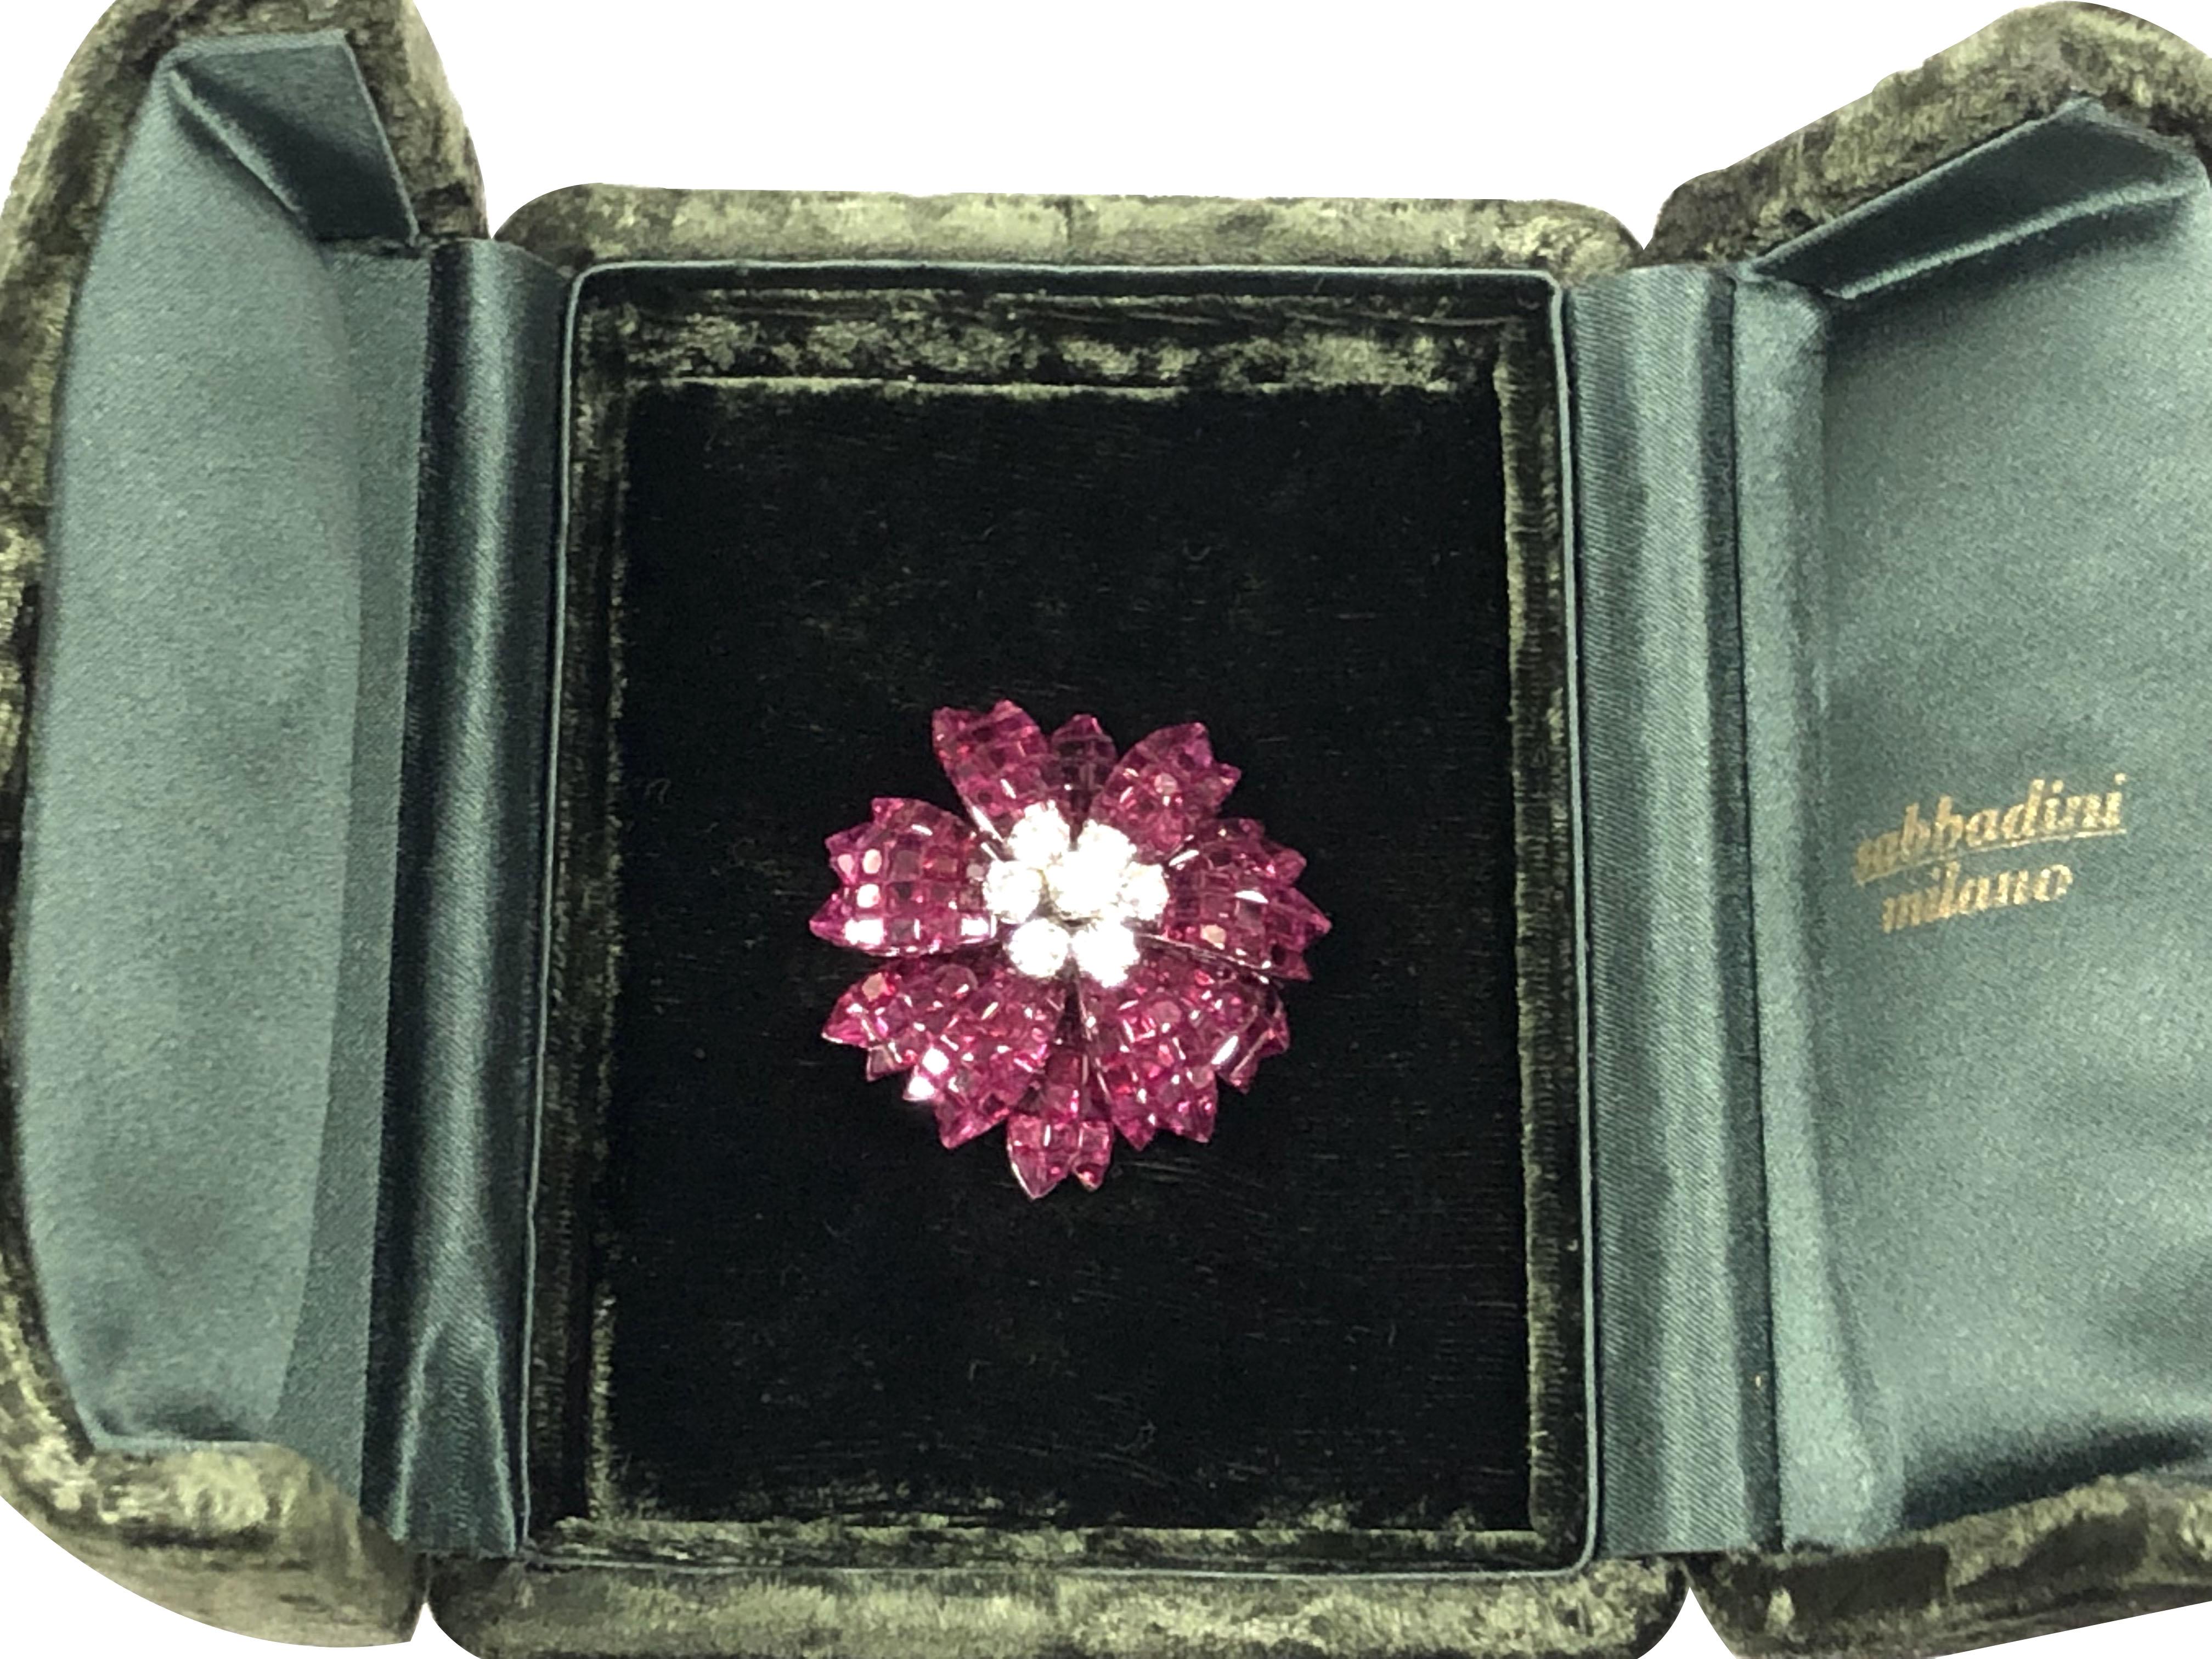 Sabbadini Invisible set Gold Ruby and Diamond Flower Brooch 2